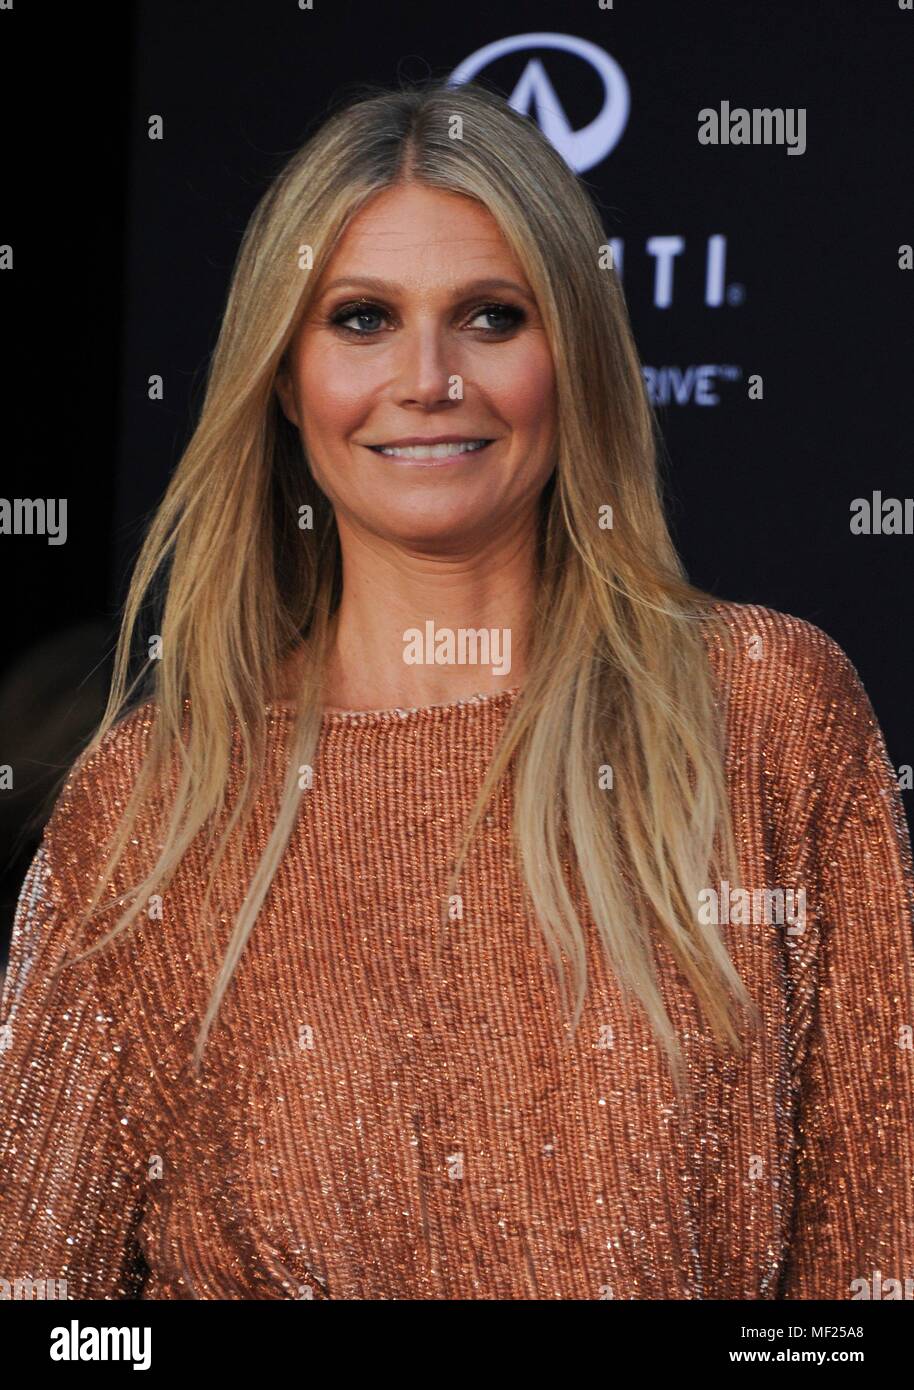 Gwyneth Paltrow at arrivals for AVENGERS: INFINITY WAR Premiere - Part 2, Hollywood, Los Angeles, CA April 23, 2018. Photo By: Elizabeth Goodenough/Everett Collection Stock Photo